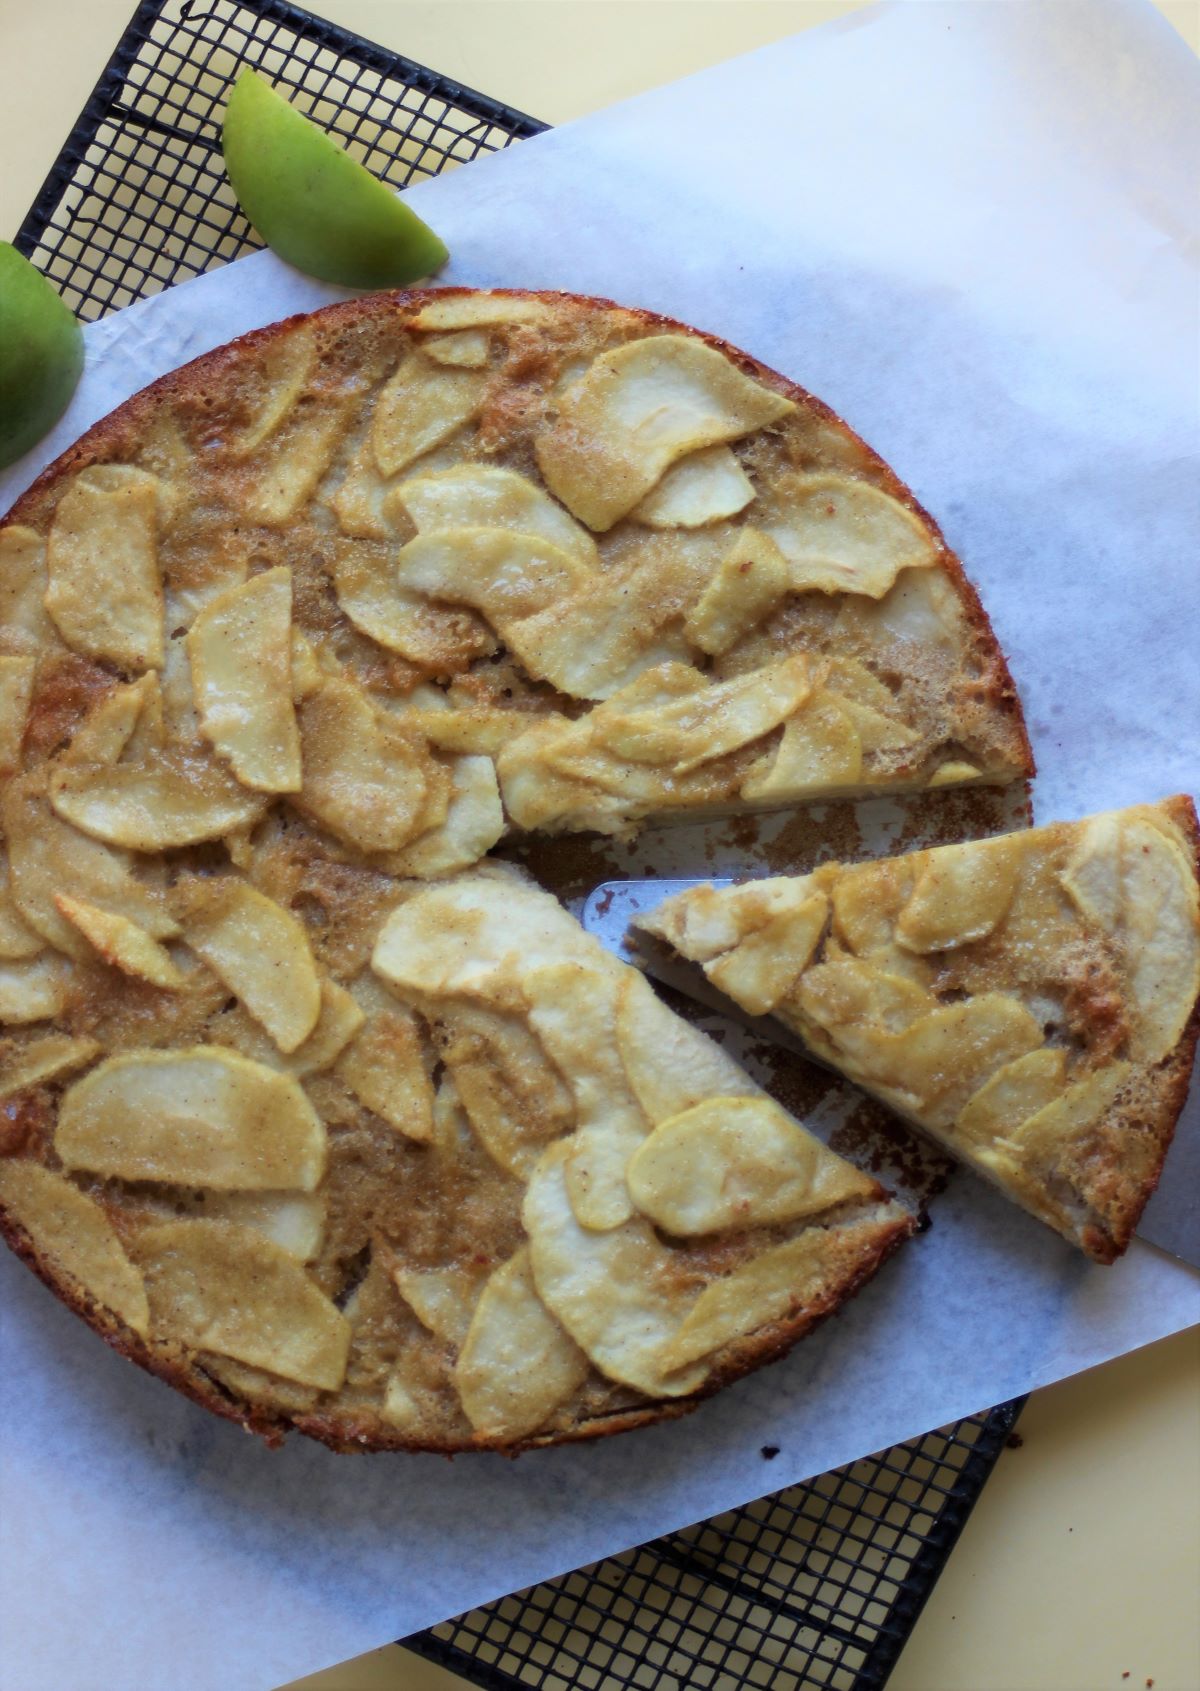 apple cake, a portion coming out of the base, on a parchment paper.